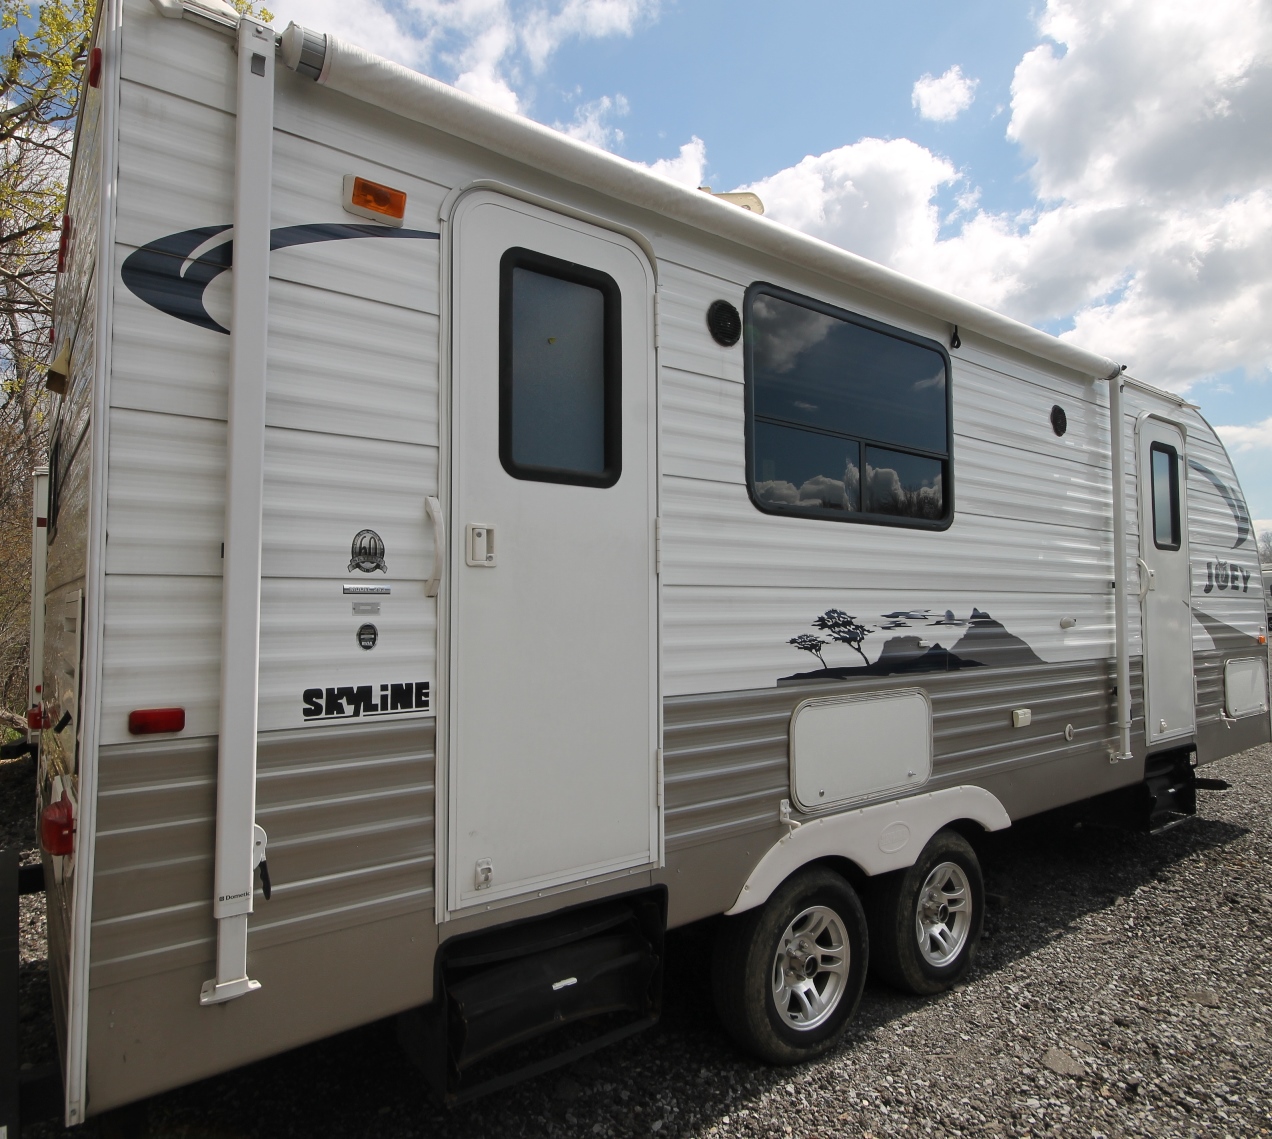 24 ft travel trailer for sale ontario